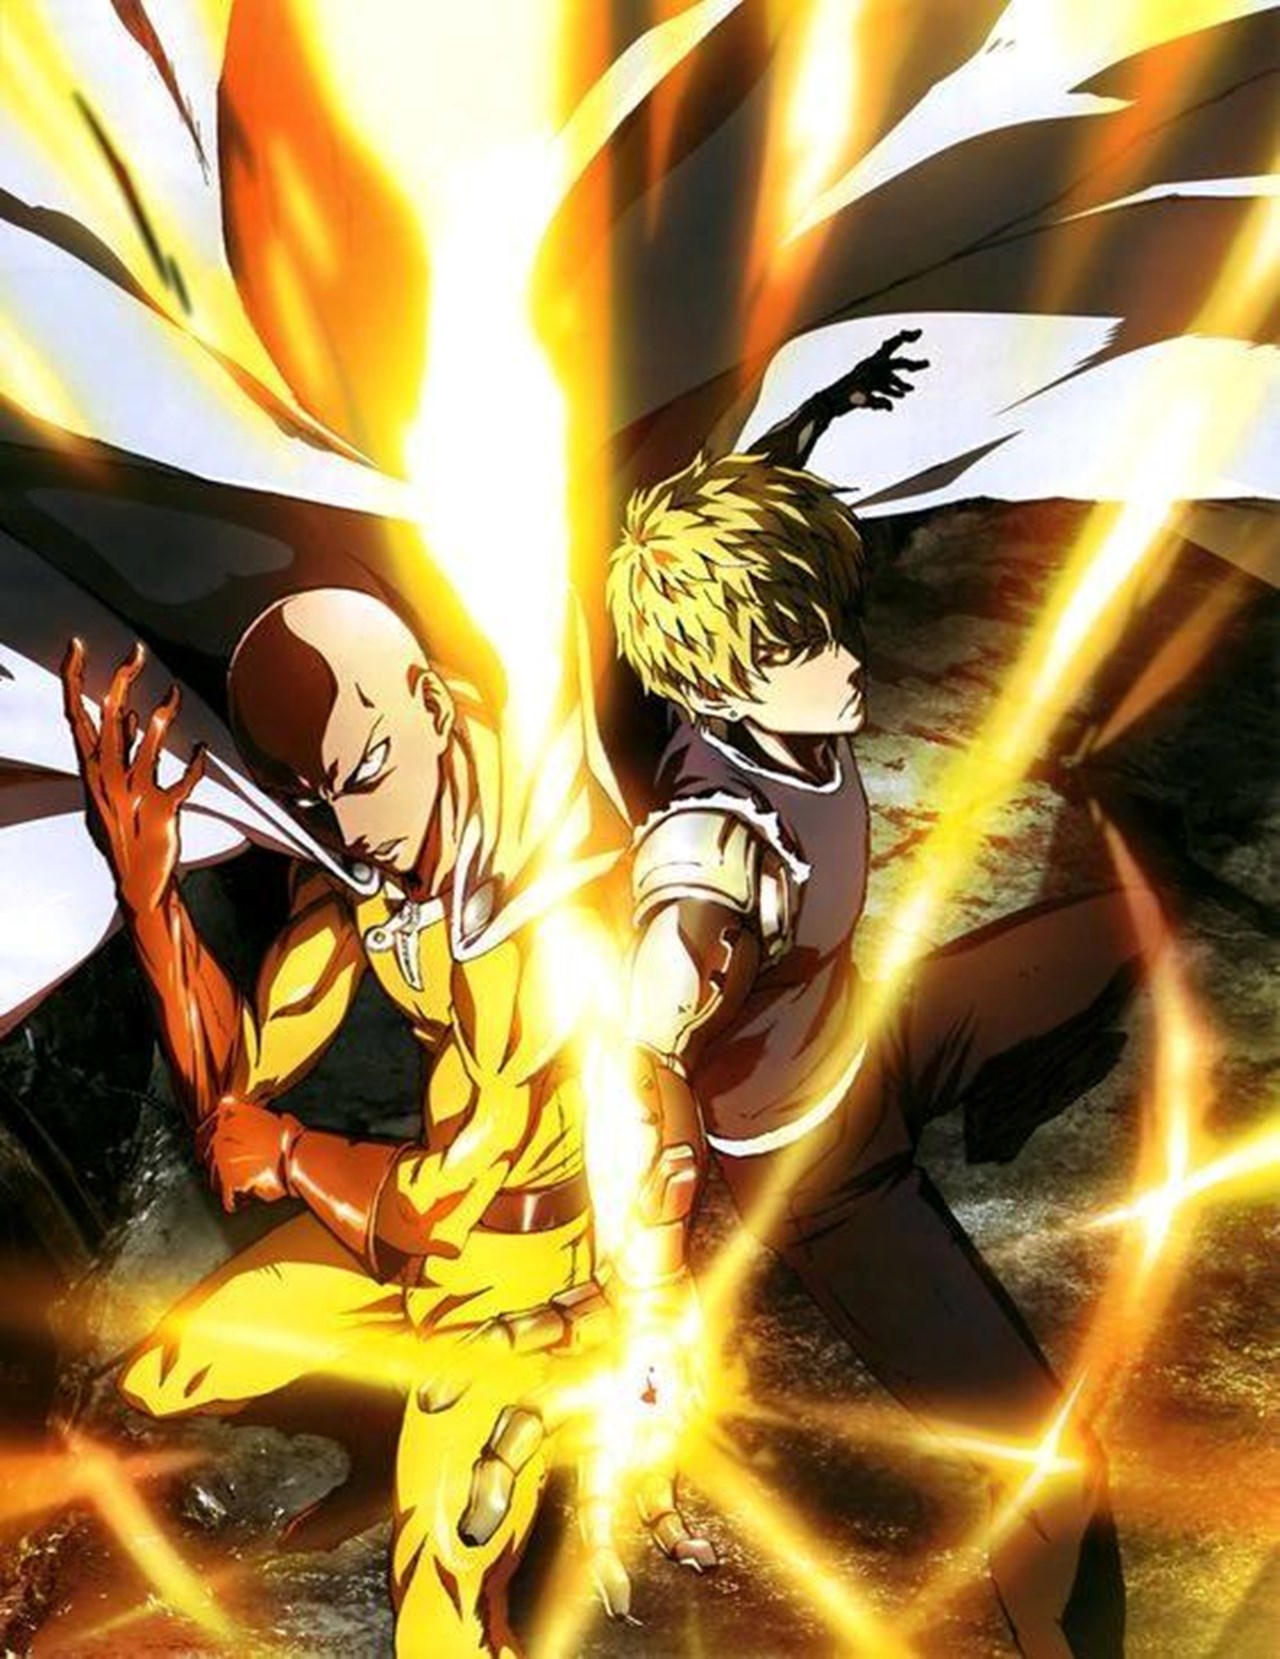 One Punch Man Season 3: Expected release date, Studio and more